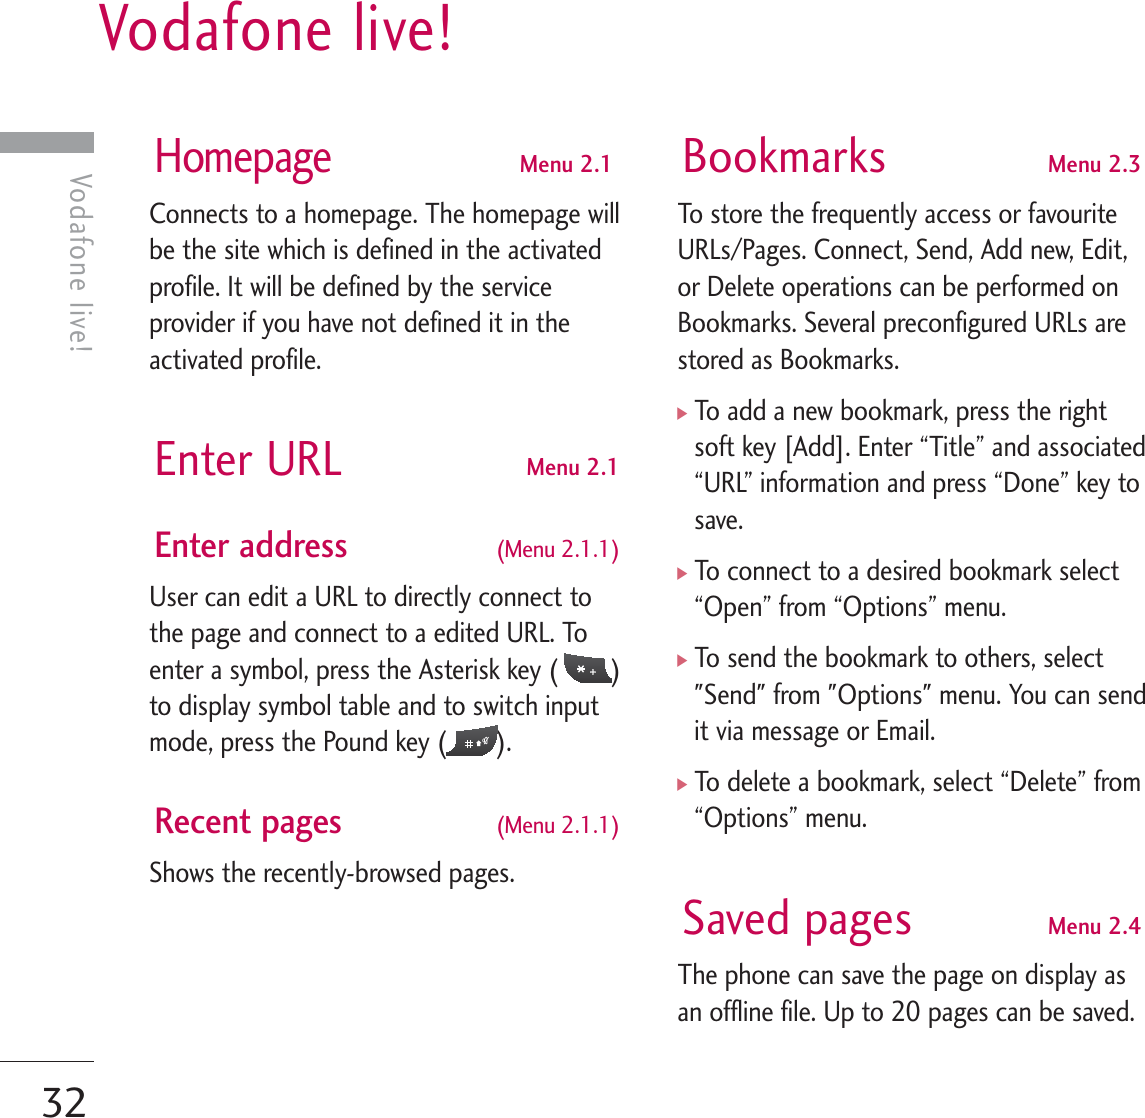 Vodafone live!32Vodafone live!HomepageMenu 2.1Connects to a homepage. The homepage willbe the site which is defined in the activatedprofile. It will be defined by the serviceprovider if you have not defined it in theactivated profile.Enter URL Menu 2.1Enter address (Menu 2.1.1)User can edit a URL to directly connect tothe page and connect to a edited URL. Toenter a symbol, press the Asterisk key ( )to display symbol table and to switch inputmode, press the Pound key ( ). Recent pages (Menu 2.1.1)Shows the recently-browsed pages.  Bookmarks Menu 2.3To store the frequently access or favouriteURLs/Pages. Connect, Send, Add new, Edit,or Delete operations can be performed onBookmarks. Several preconfigured URLs arestored as Bookmarks.]To add a new bookmark, press the rightsoft key [Add]. Enter “Title” and associated“URL” information and press “Done” key tosave.]To connect to a desired bookmark select“Open” from “Options” menu.]To send the bookmark to others, select&quot;Send&quot; from &quot;Options&quot; menu. You can sendit via message or Email.]To delete a bookmark, select “Delete” from“Options” menu.Saved pages Menu 2.4The phone can save the page on display asan offline file. Up to 20 pages can be saved.